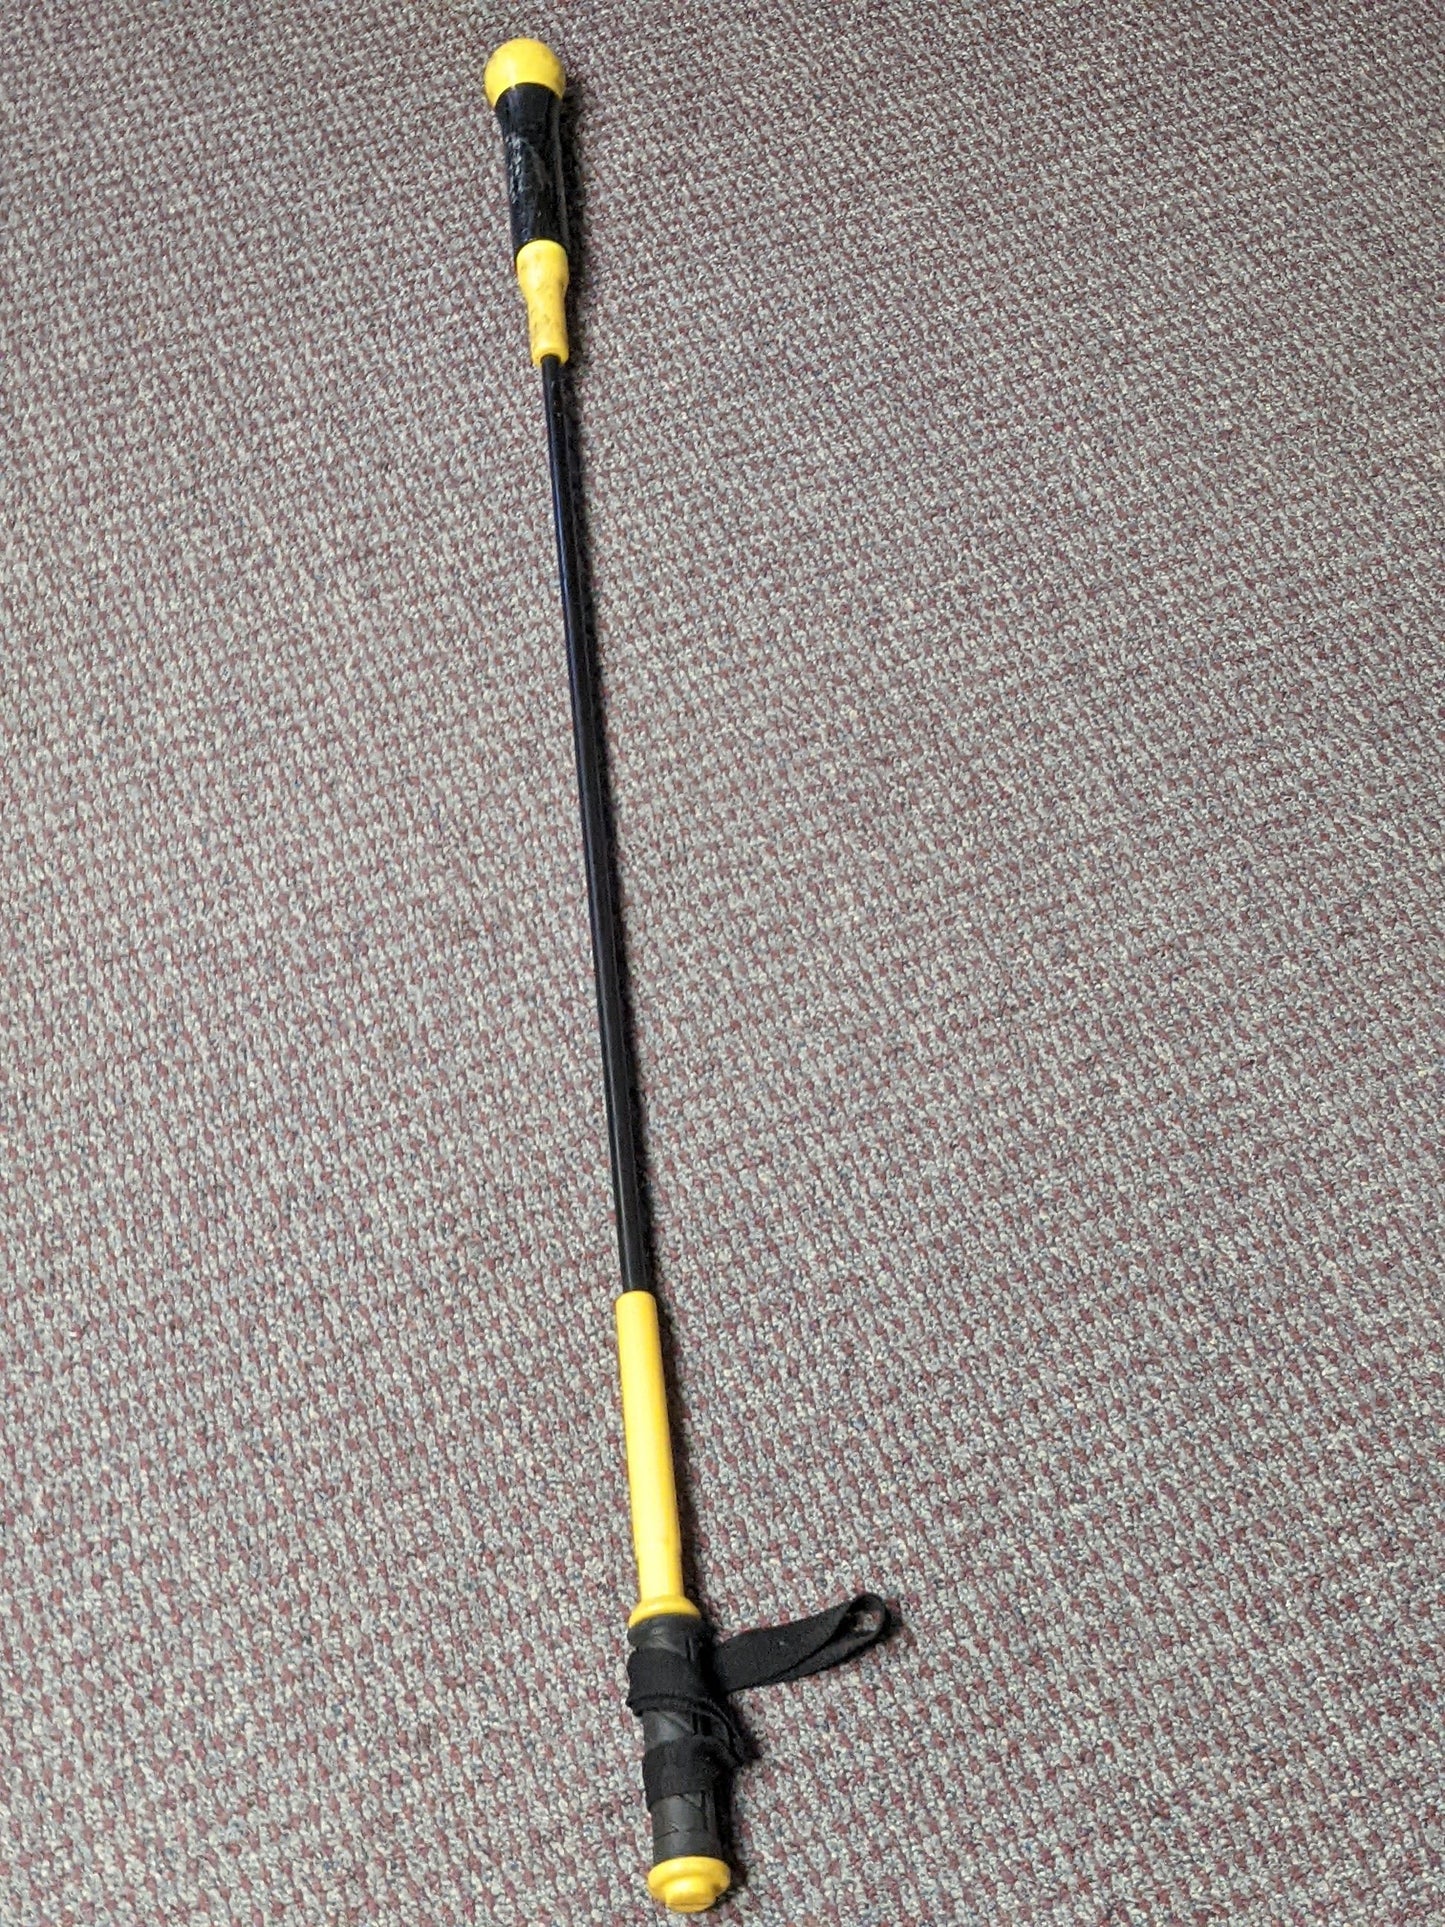 SKLZ Baseball/Softball Hitting Stick - Swing Trainer Size 52 In Color Yellow Condition Used